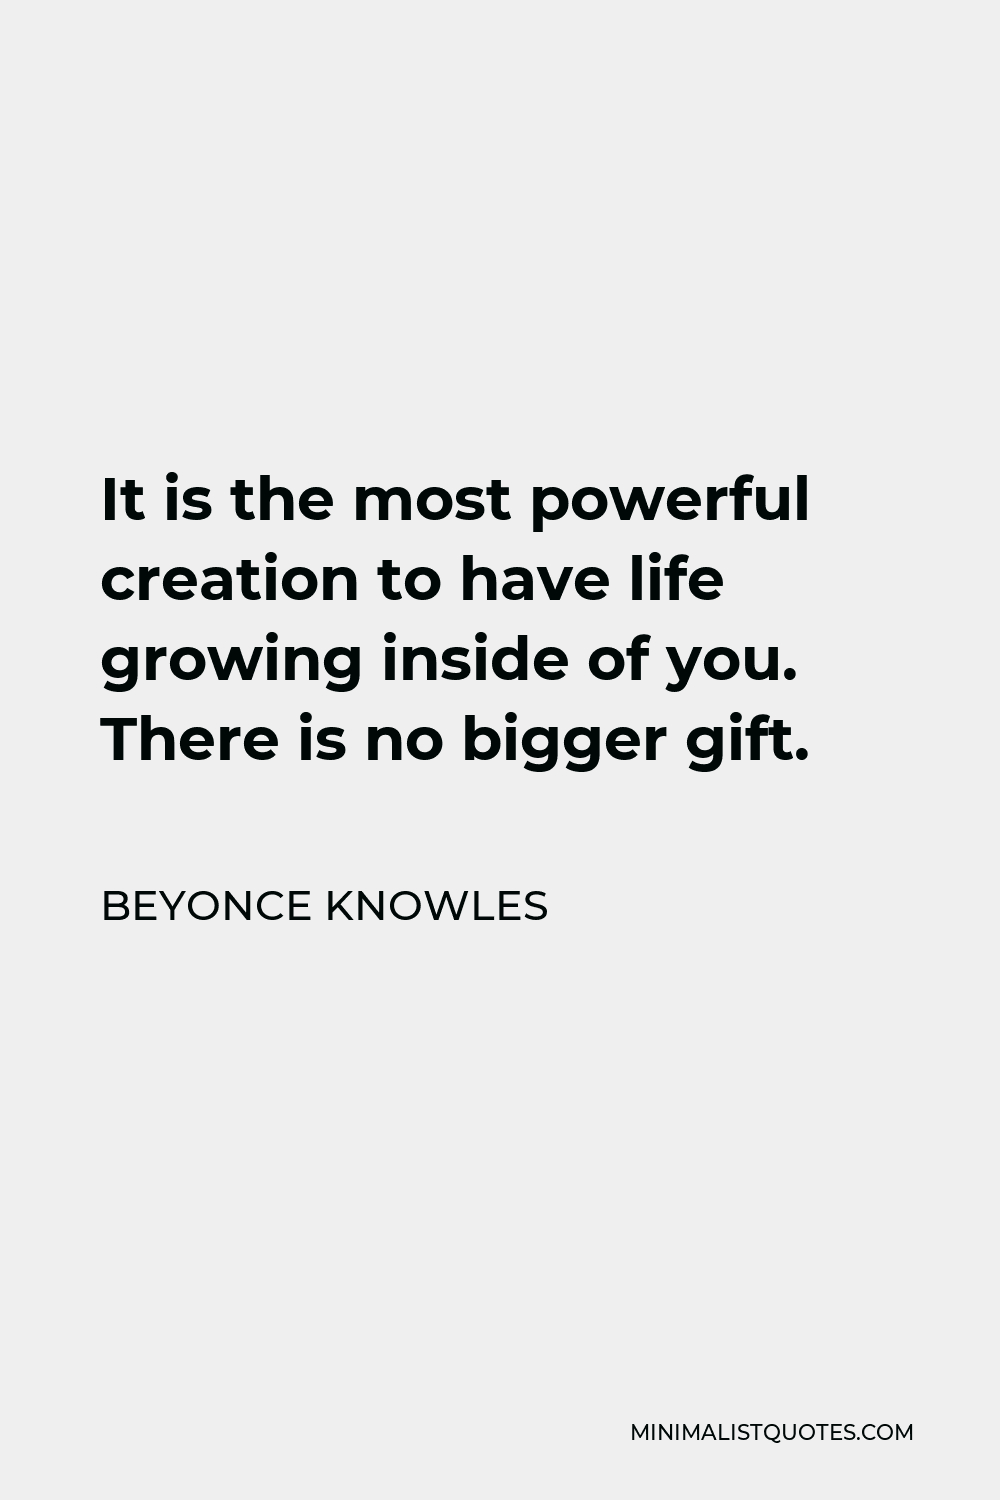 Beyonce Knowles Quote - It is the most powerful creation to have life growing inside of you. There is no bigger gift.